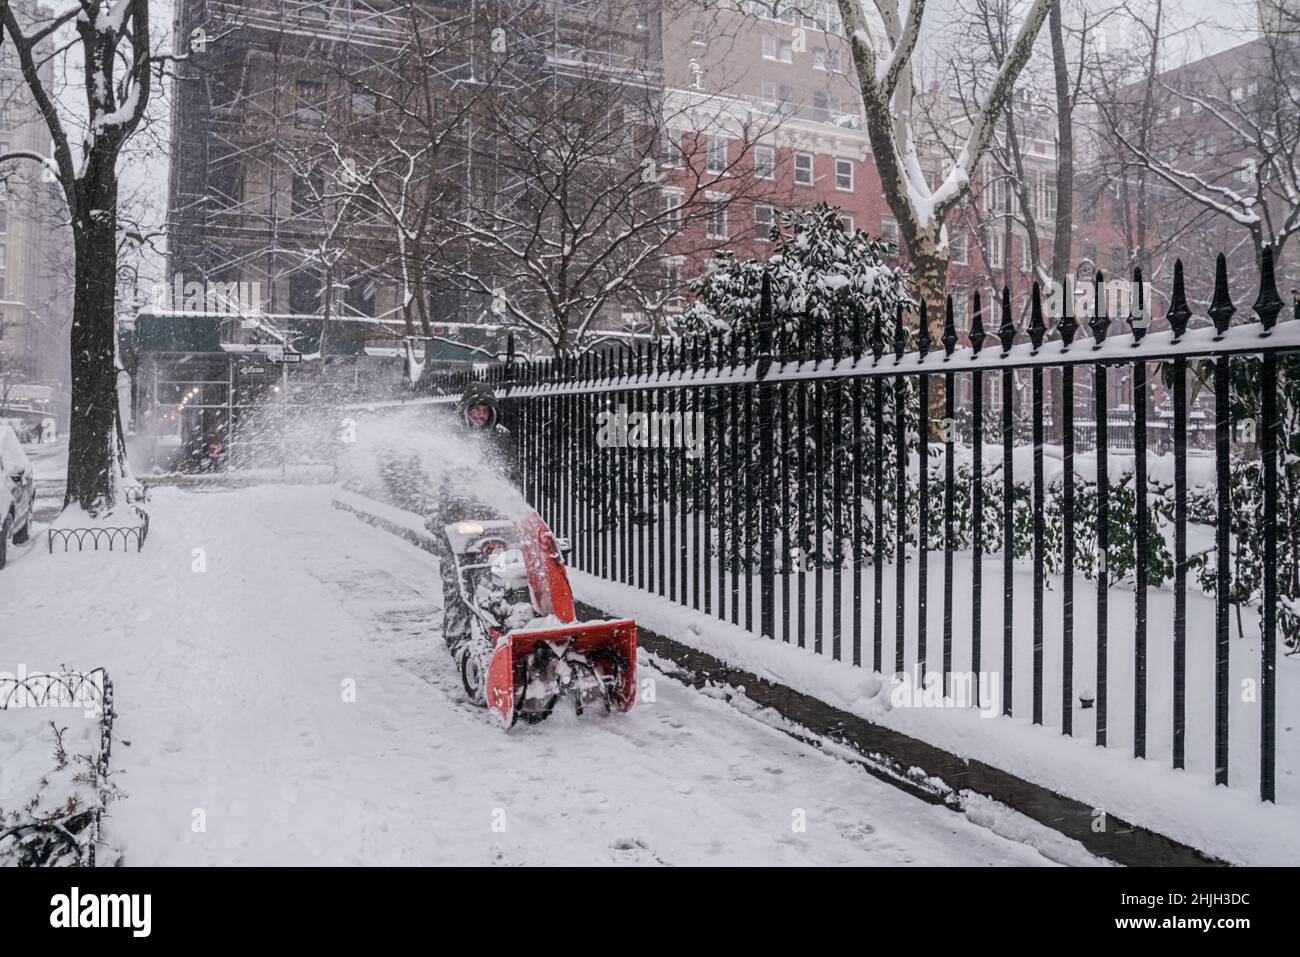 Digging out after a snow storm: a man using snow blower to clear sidewalk in Gramercy Park, New York City. Stock Photo